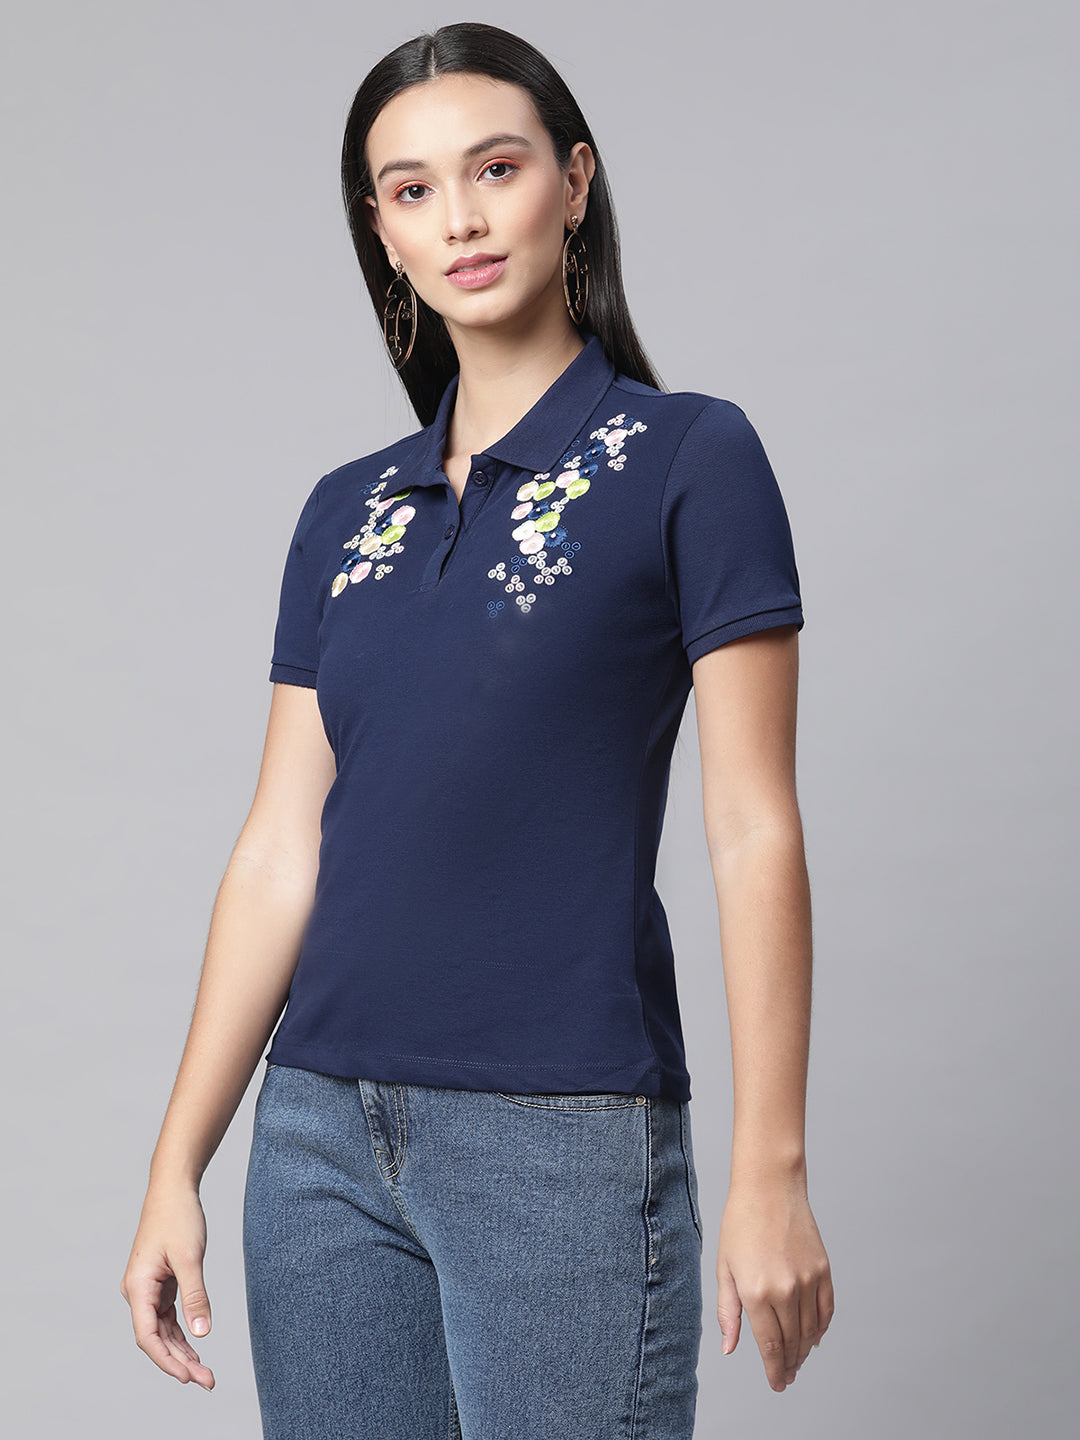 women navy blue polo embroidery t shirt